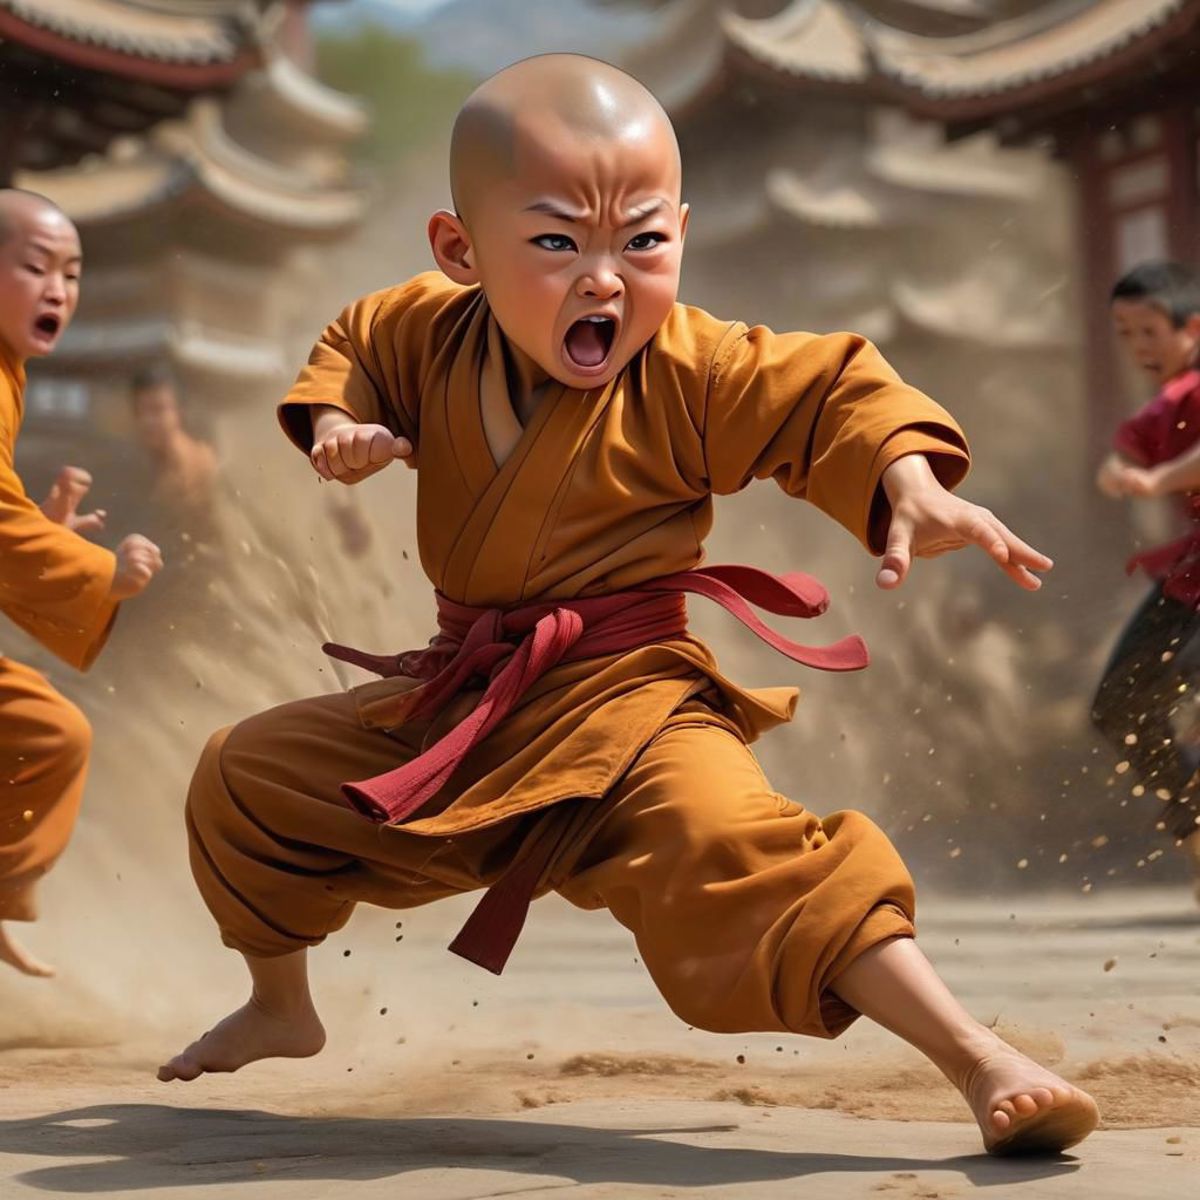 A young child in a karate outfit is yelling while kicking up sand.